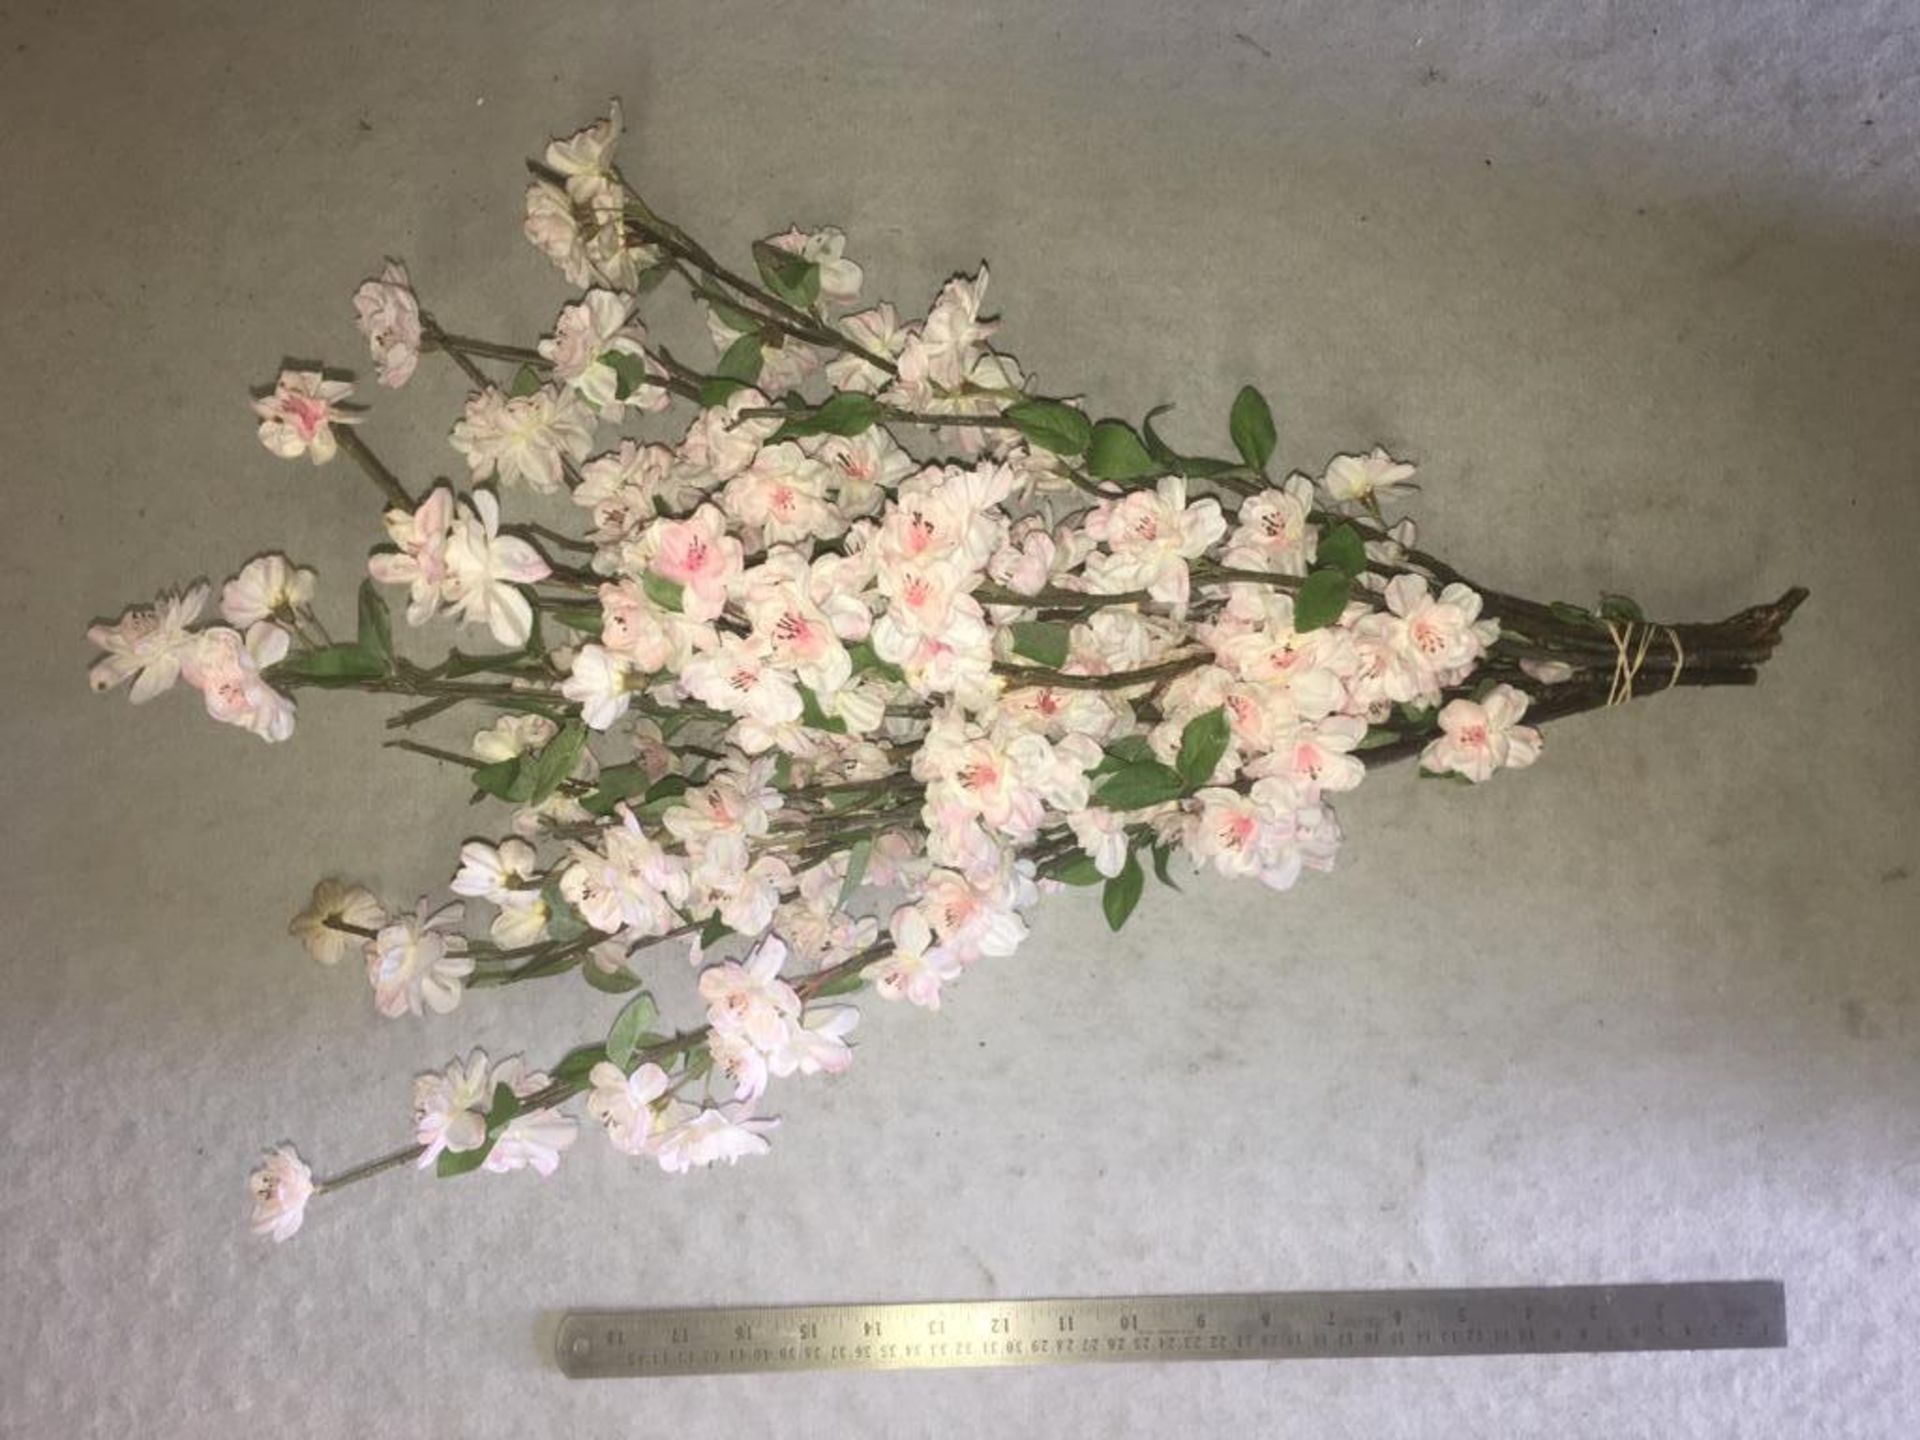 80 pieces of Artificial blossom - double flowers - light pink - used